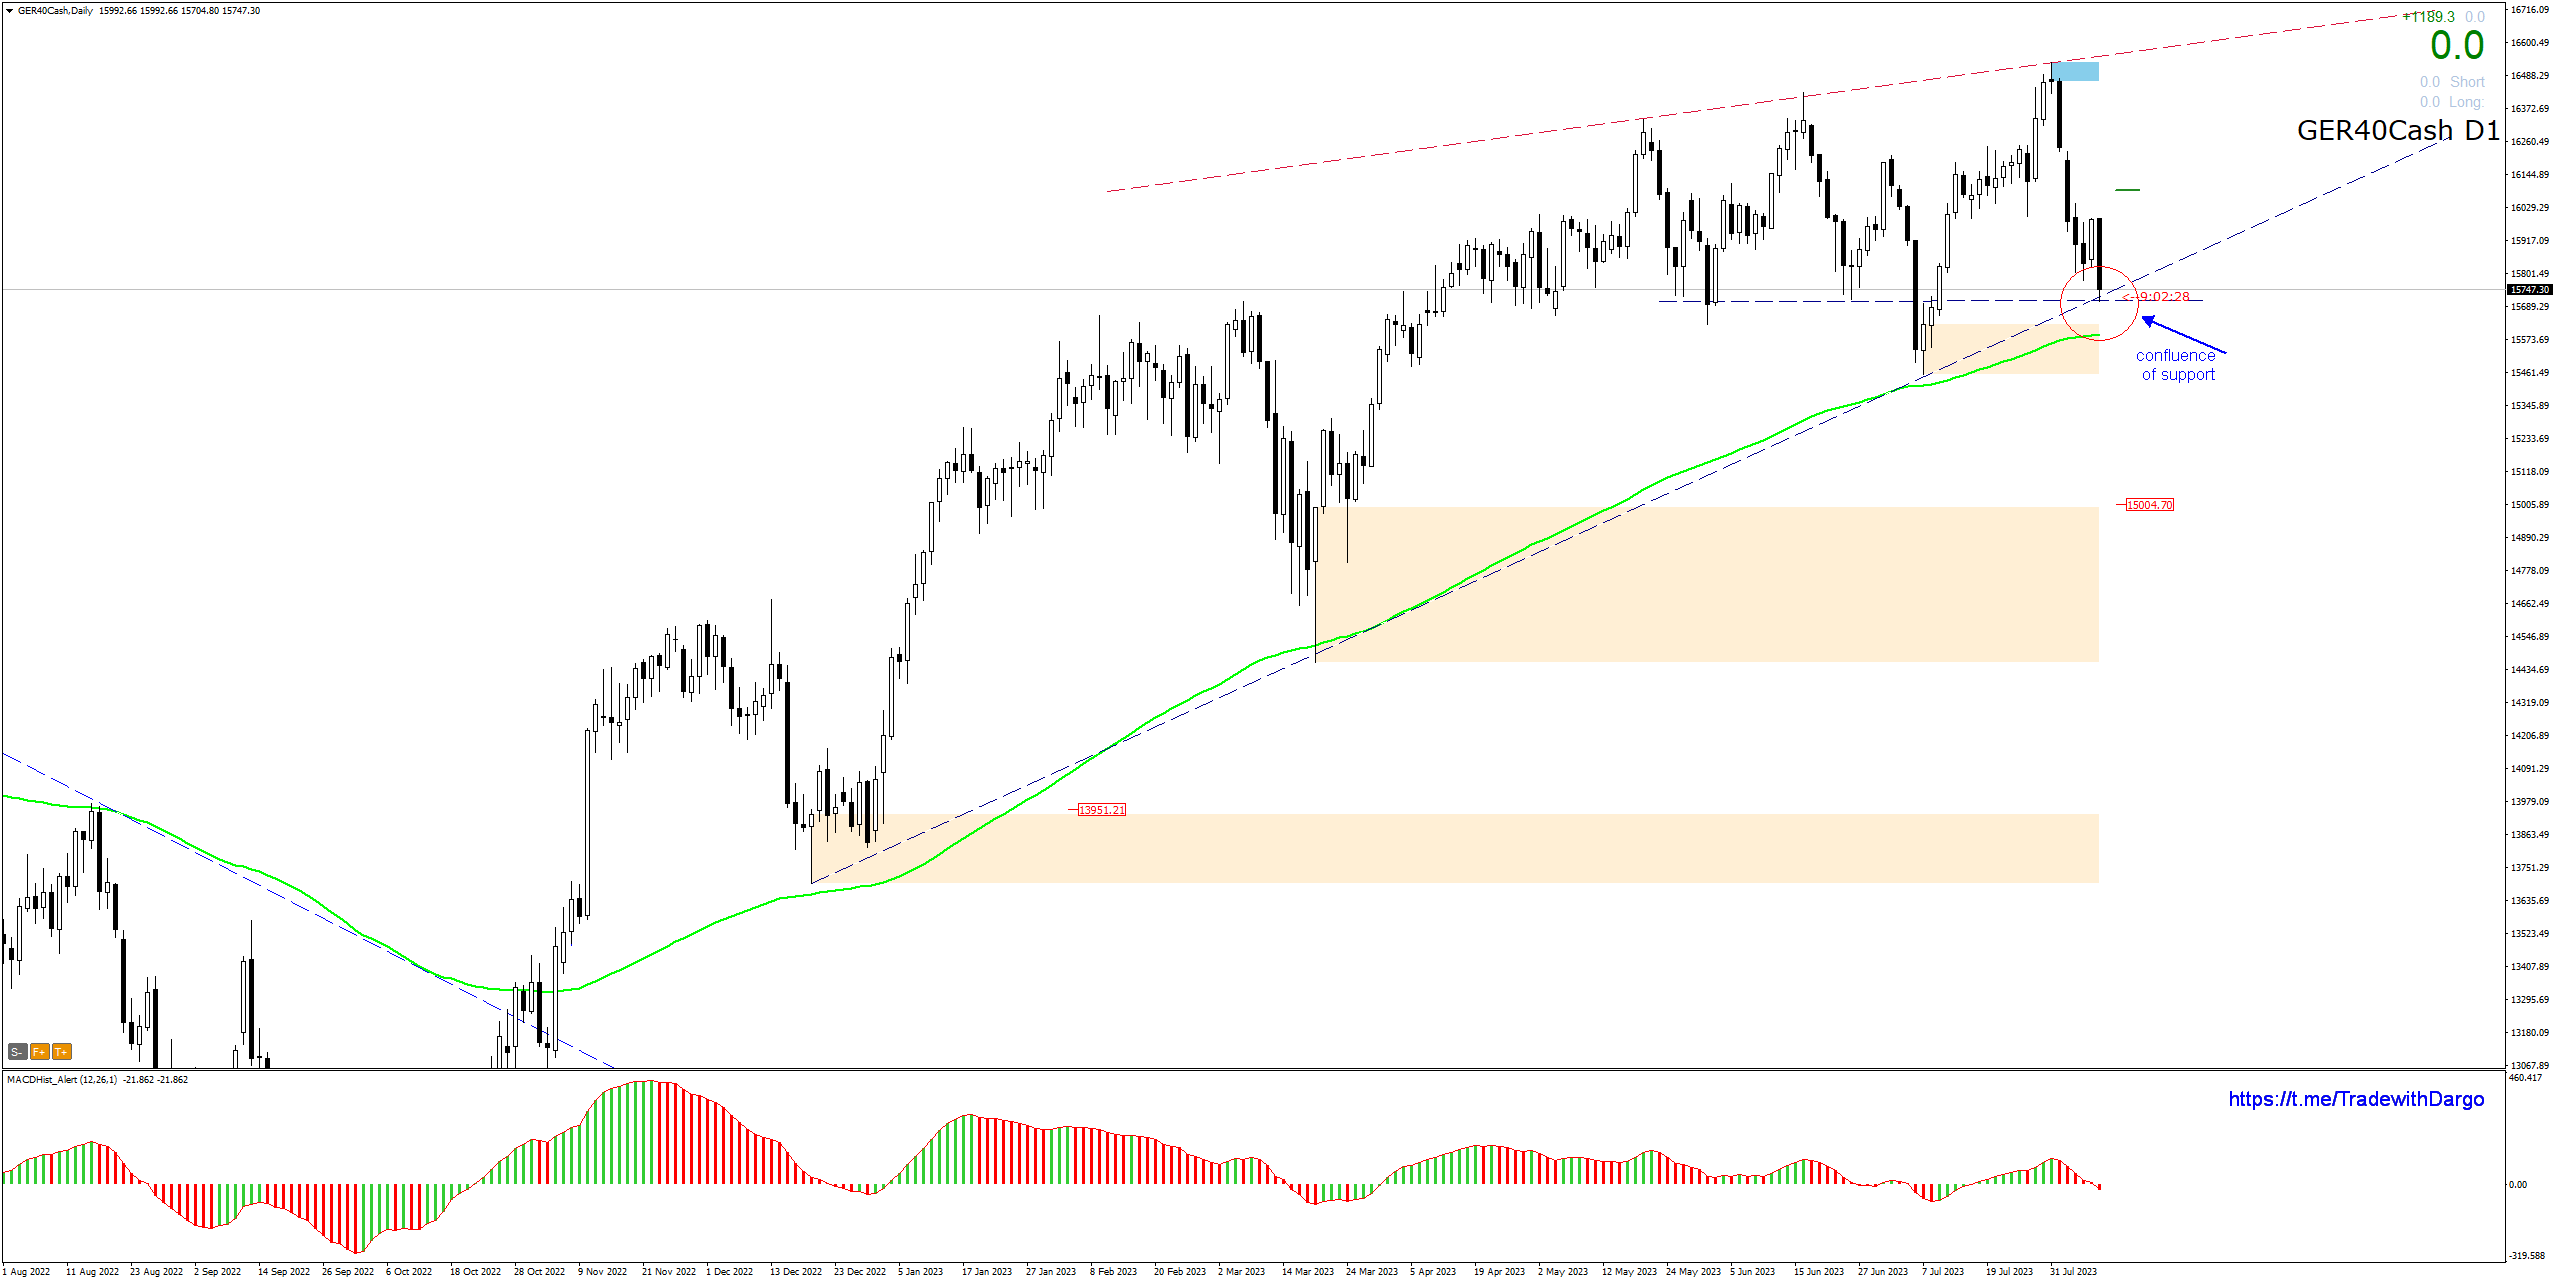 DAX - the index has reached the confluence of supports 